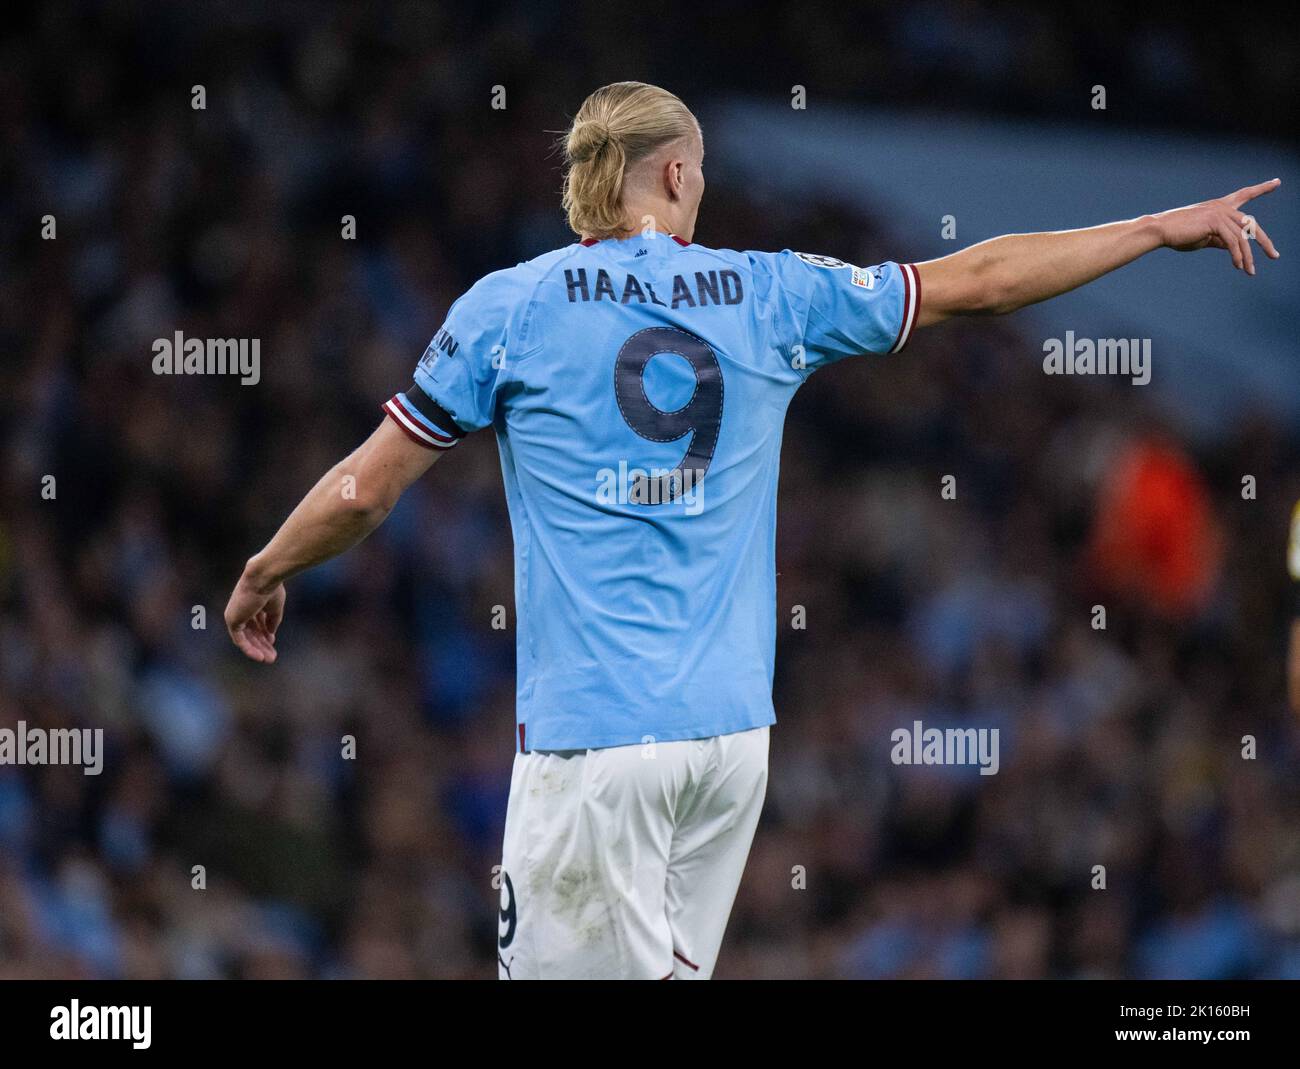 MANCHESTER, ENGLAND - SEPTEMBER 14: Erling Haaland of Manchester City control ball during the UEFA Champions League group G match between Manchester C Stock Photo